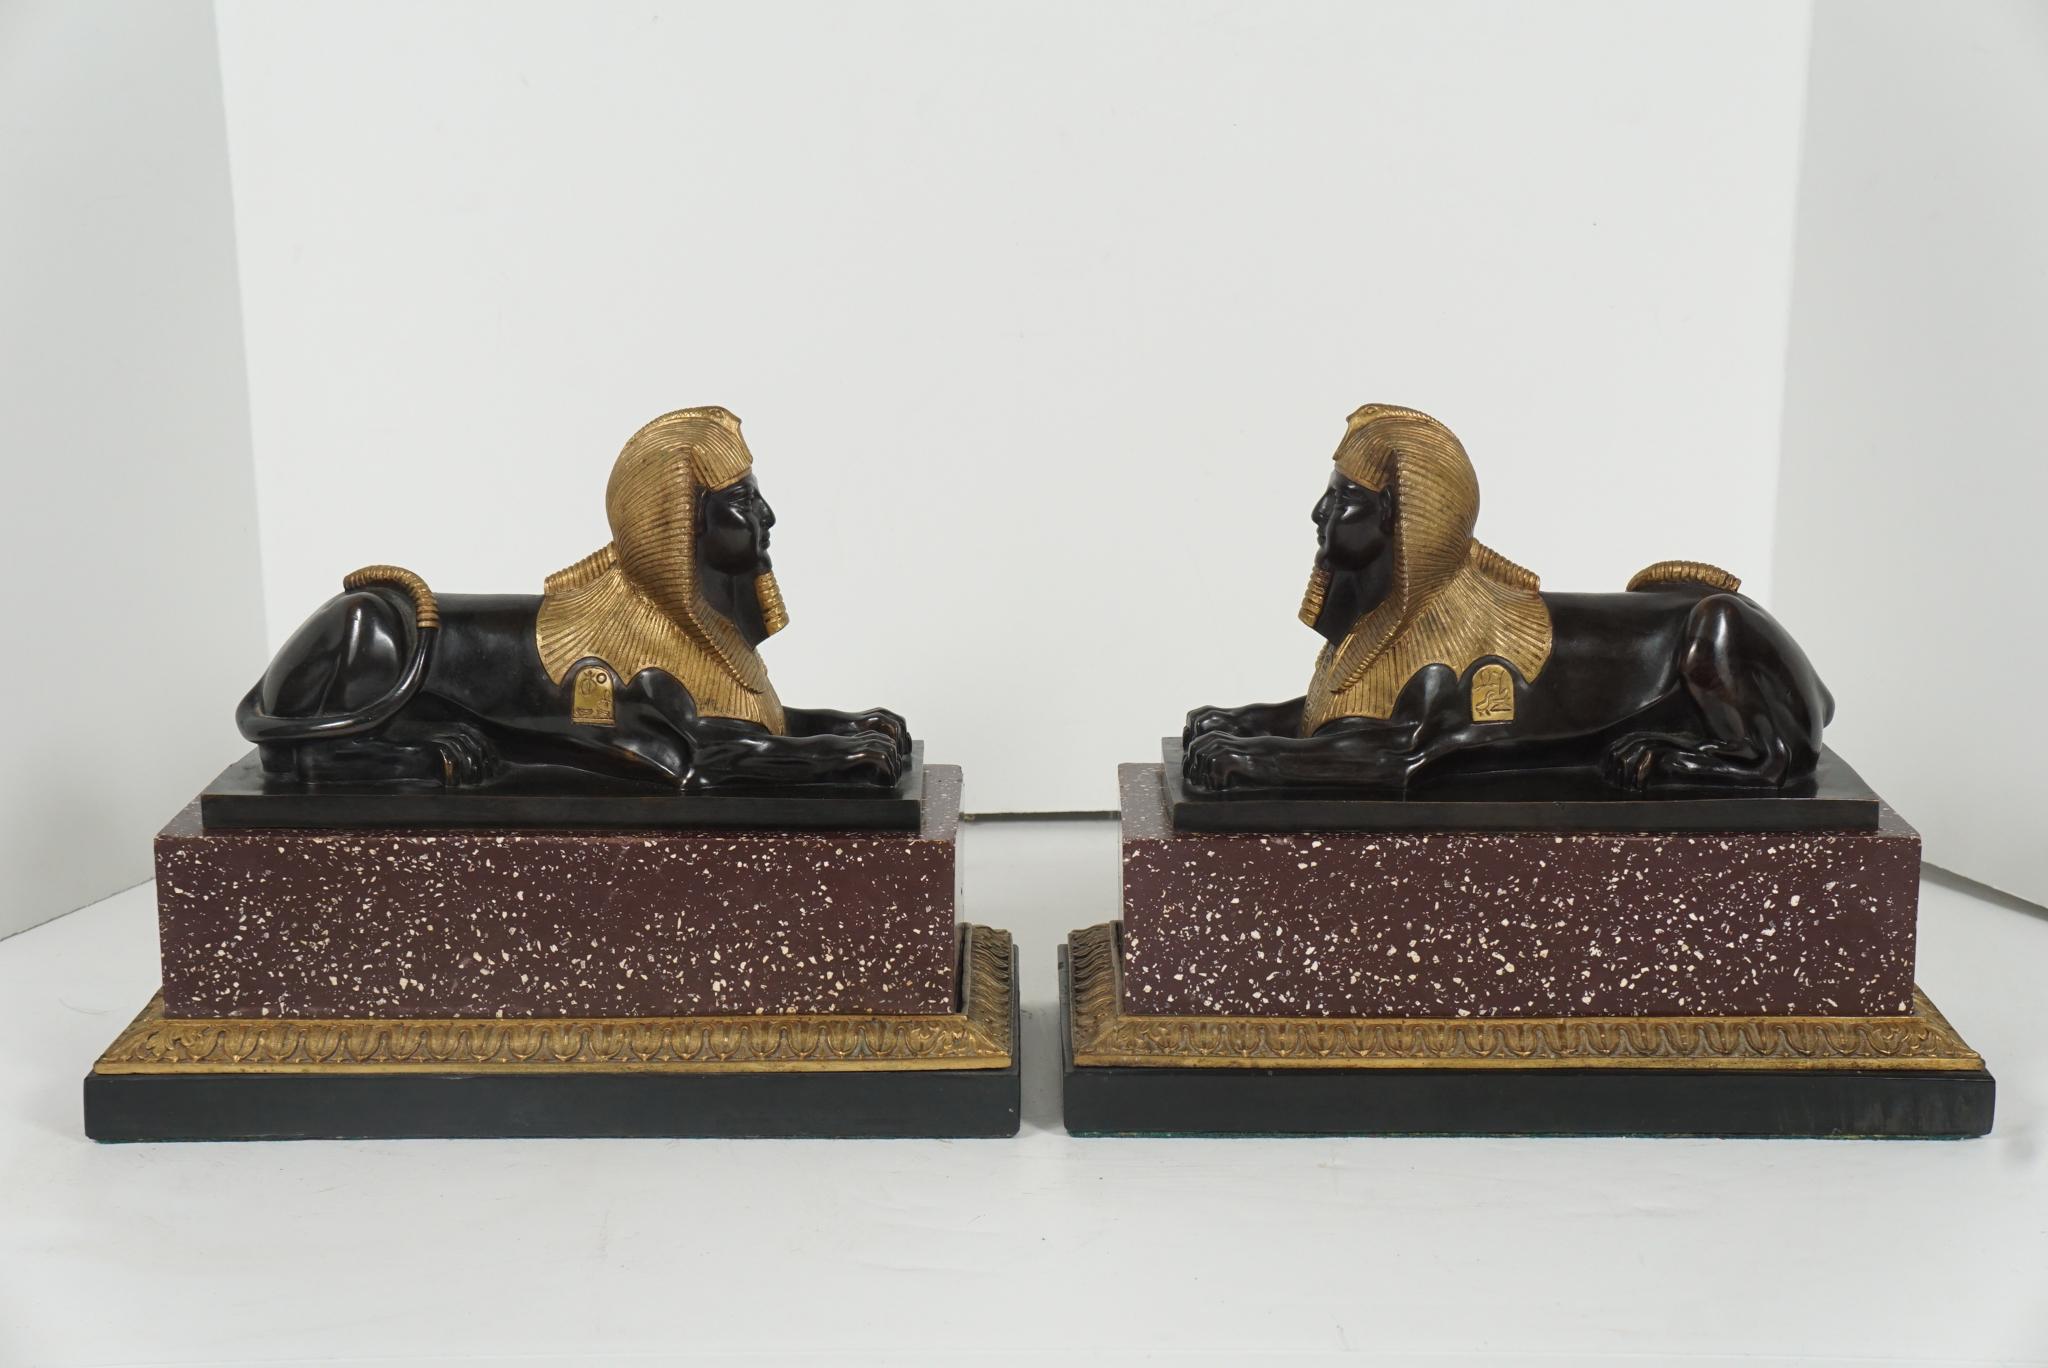 Made in France circa 1840s this finely cast pair of sphinxes are represented in the recumbent position most associated with the form. Showing on both figures are two hieroglyphic cartouches gilded as are the headdress and the ends of their wrapped